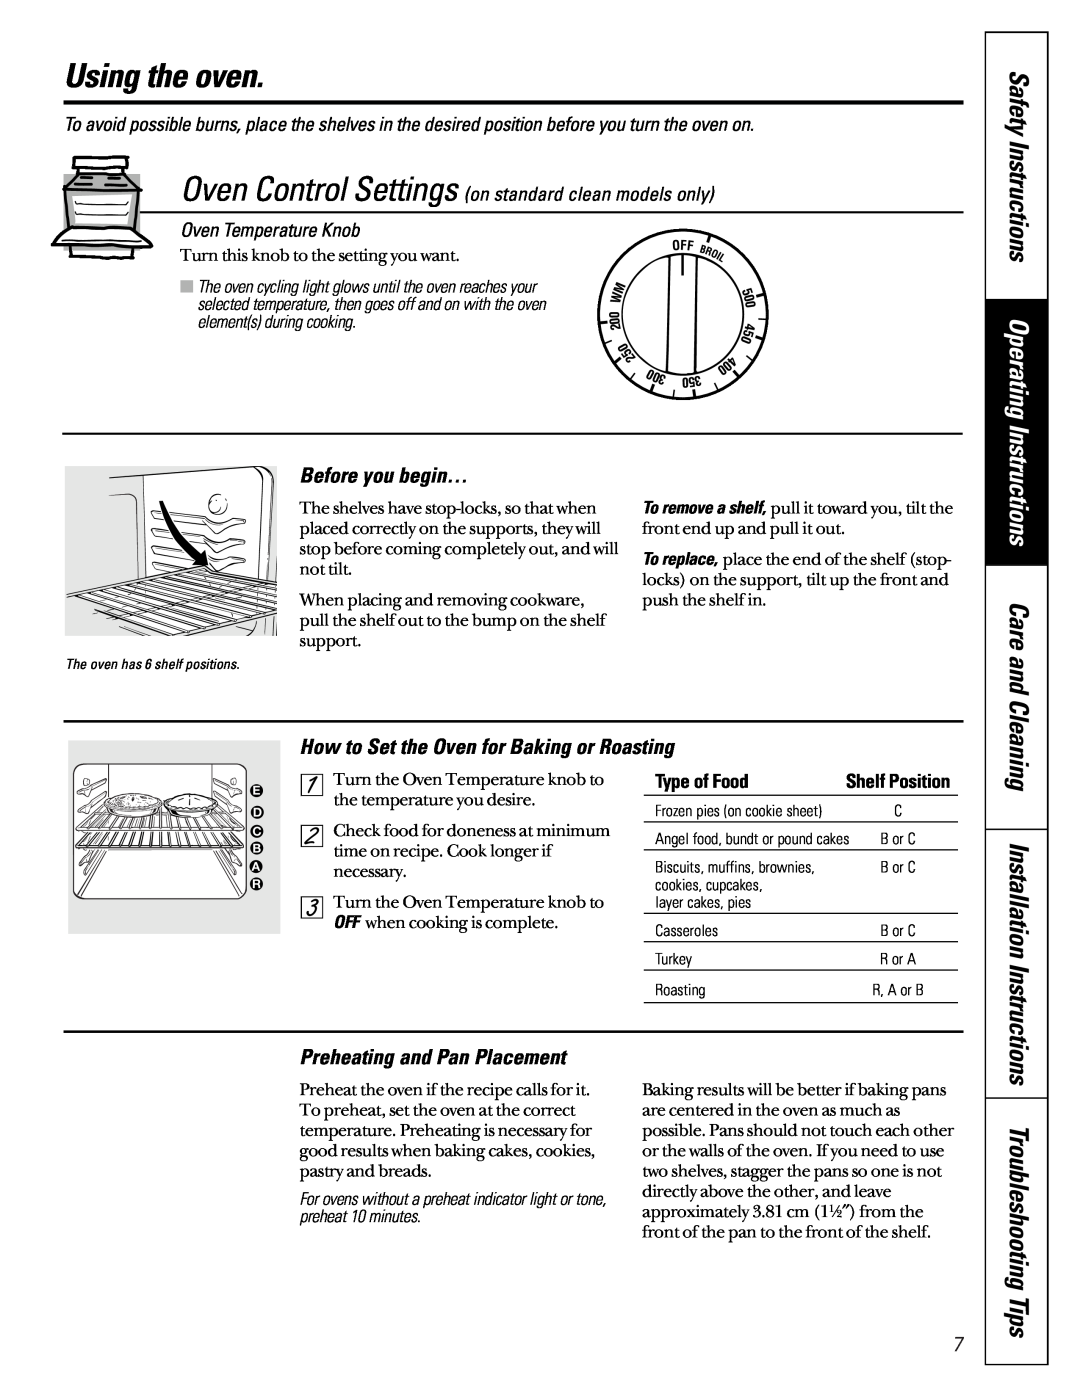 GE JBS08PIC Using the oven, Safety Instructions Operating, Instructions Care and, Before you begin…, Oven Temperature Knob 